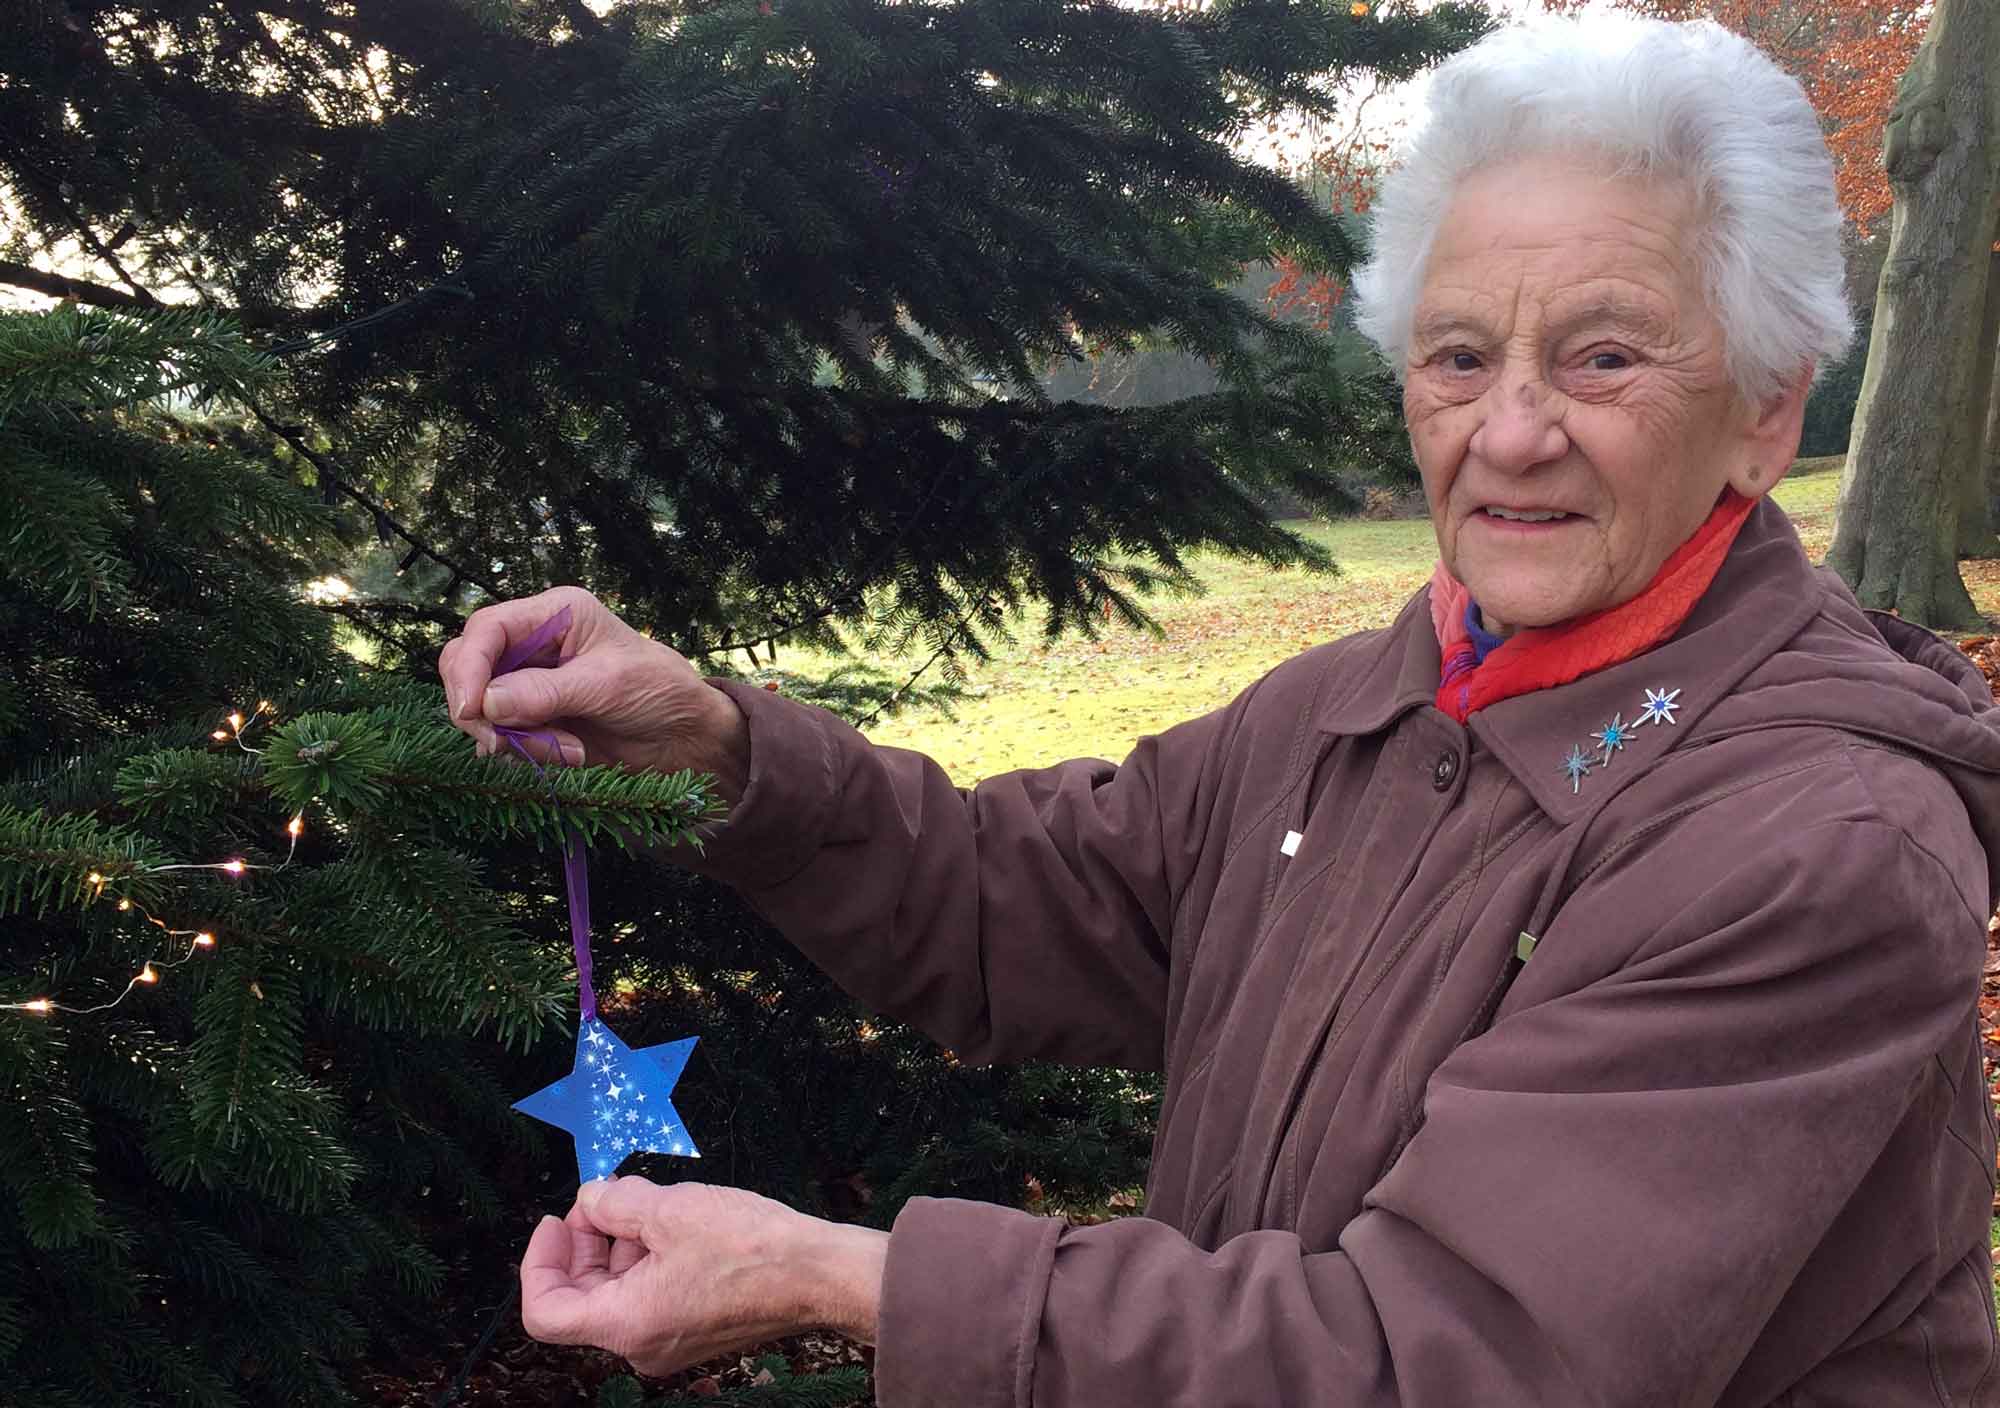 Margaret Booker, 89, from Harrogate, has made a Light up a Life dedication every year for six years to remember her husband Ken